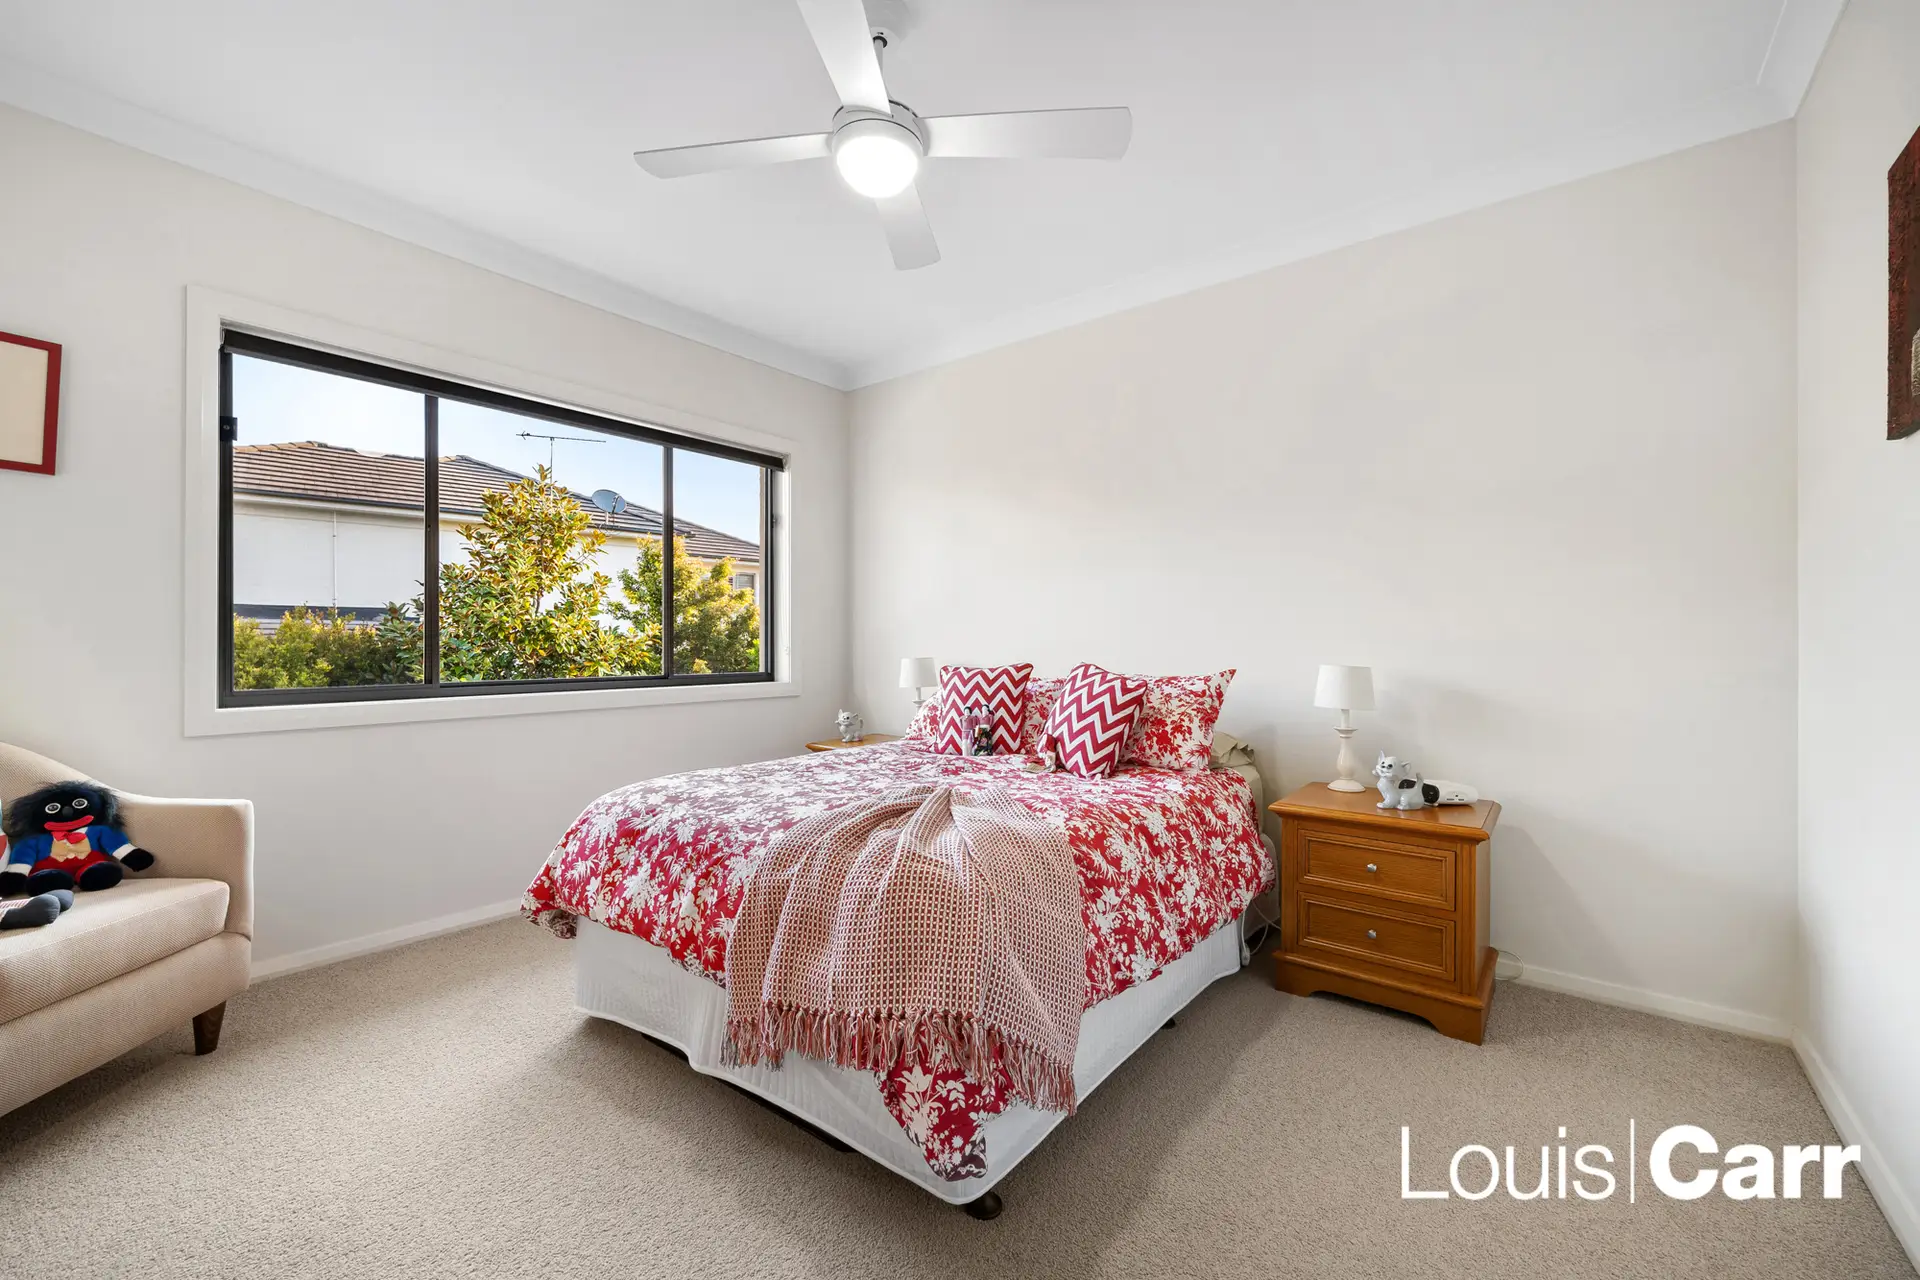 Photo #12: 5 Chelsea Road, Castle Hill - Sold by Louis Carr Real Estate